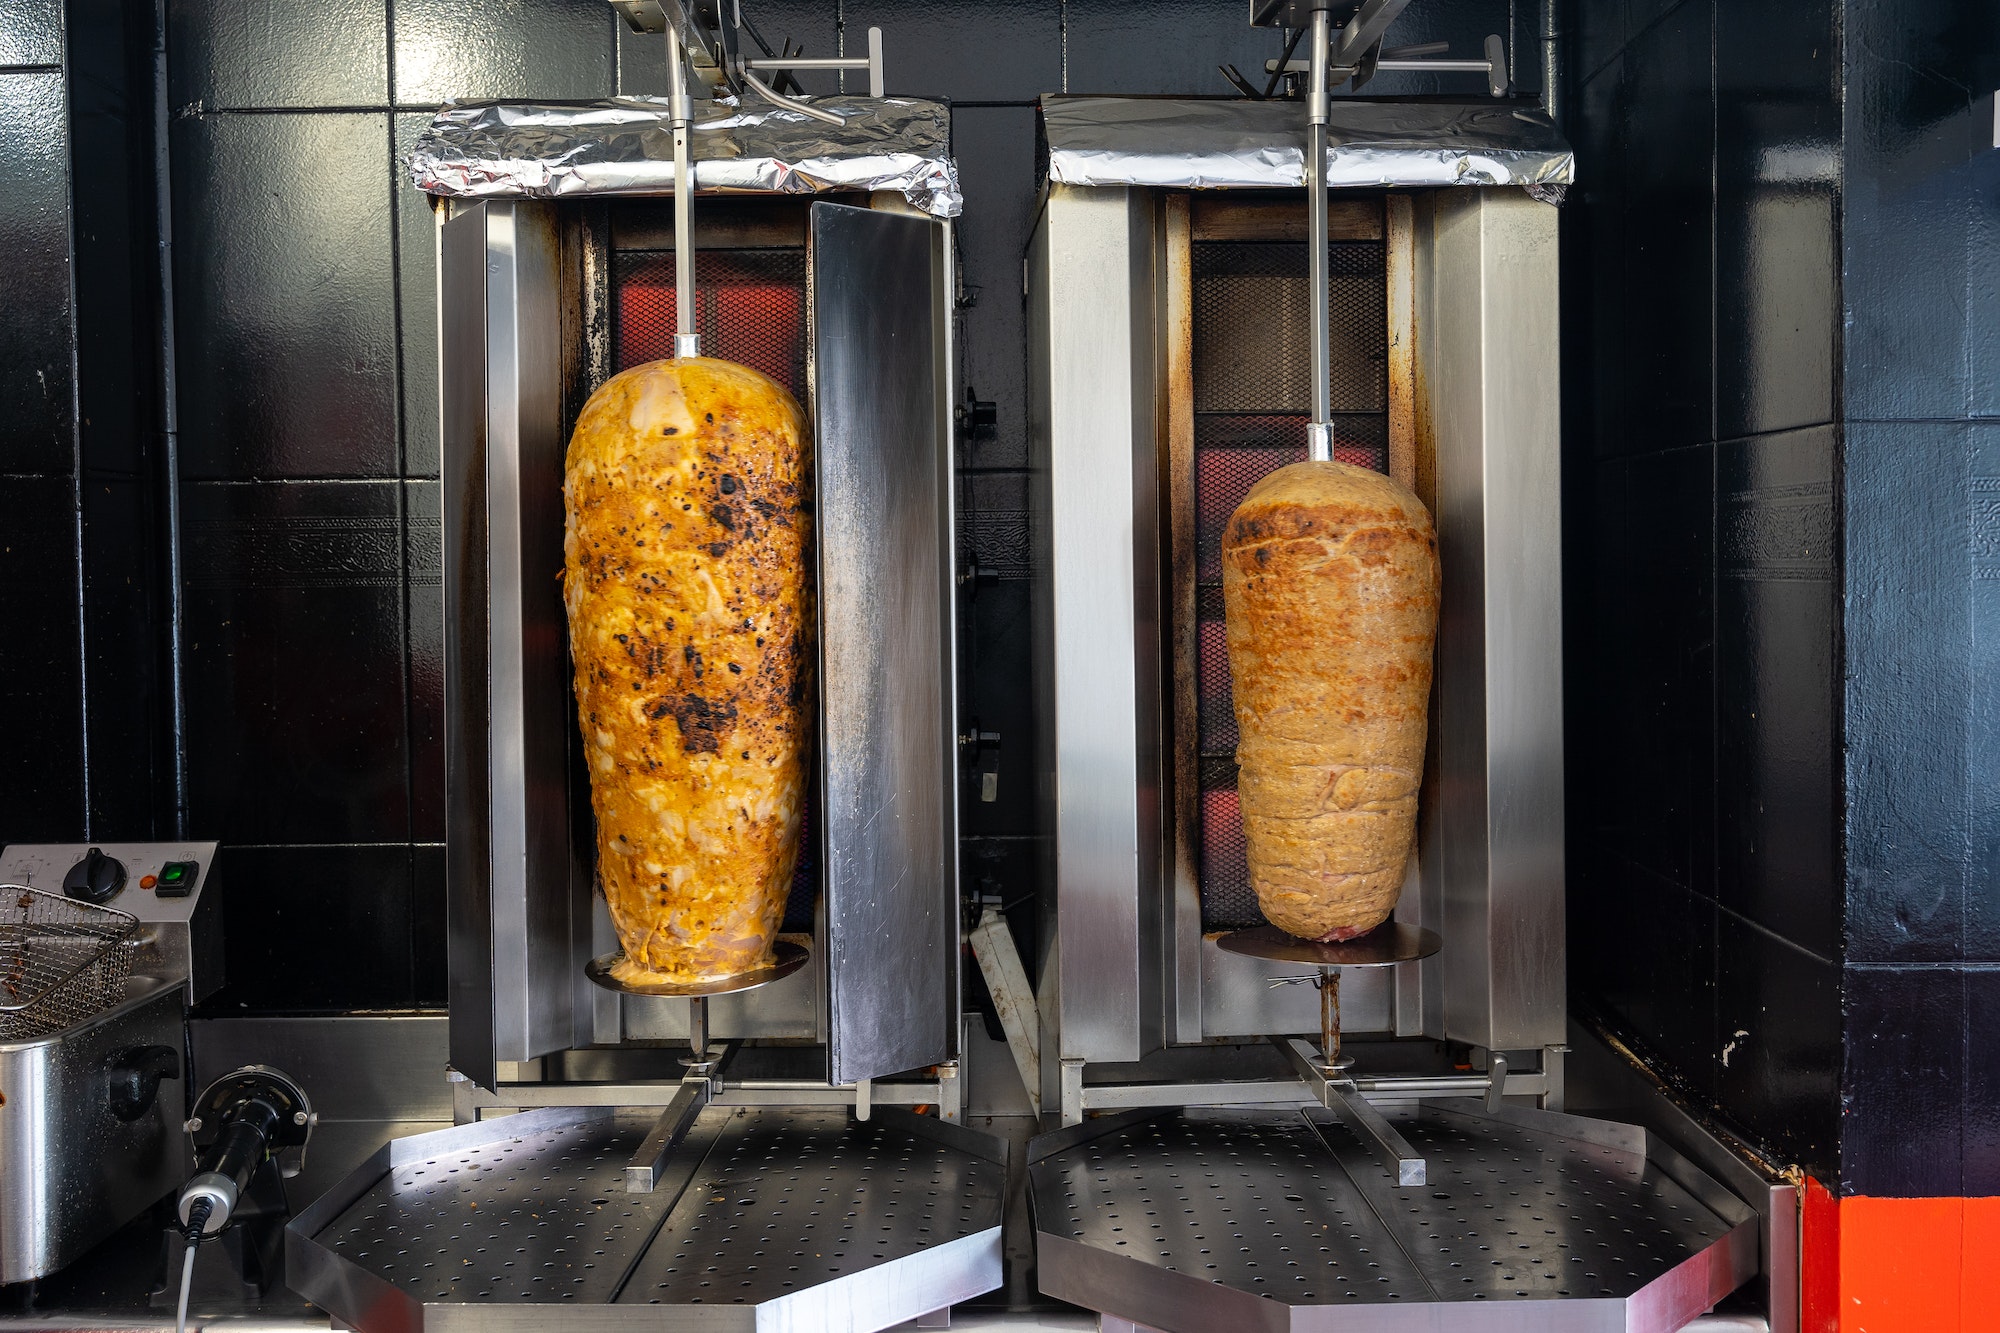 Kebab restaurant chef, doner meat on the grill or grill heating up to be sliced for kebab or durum